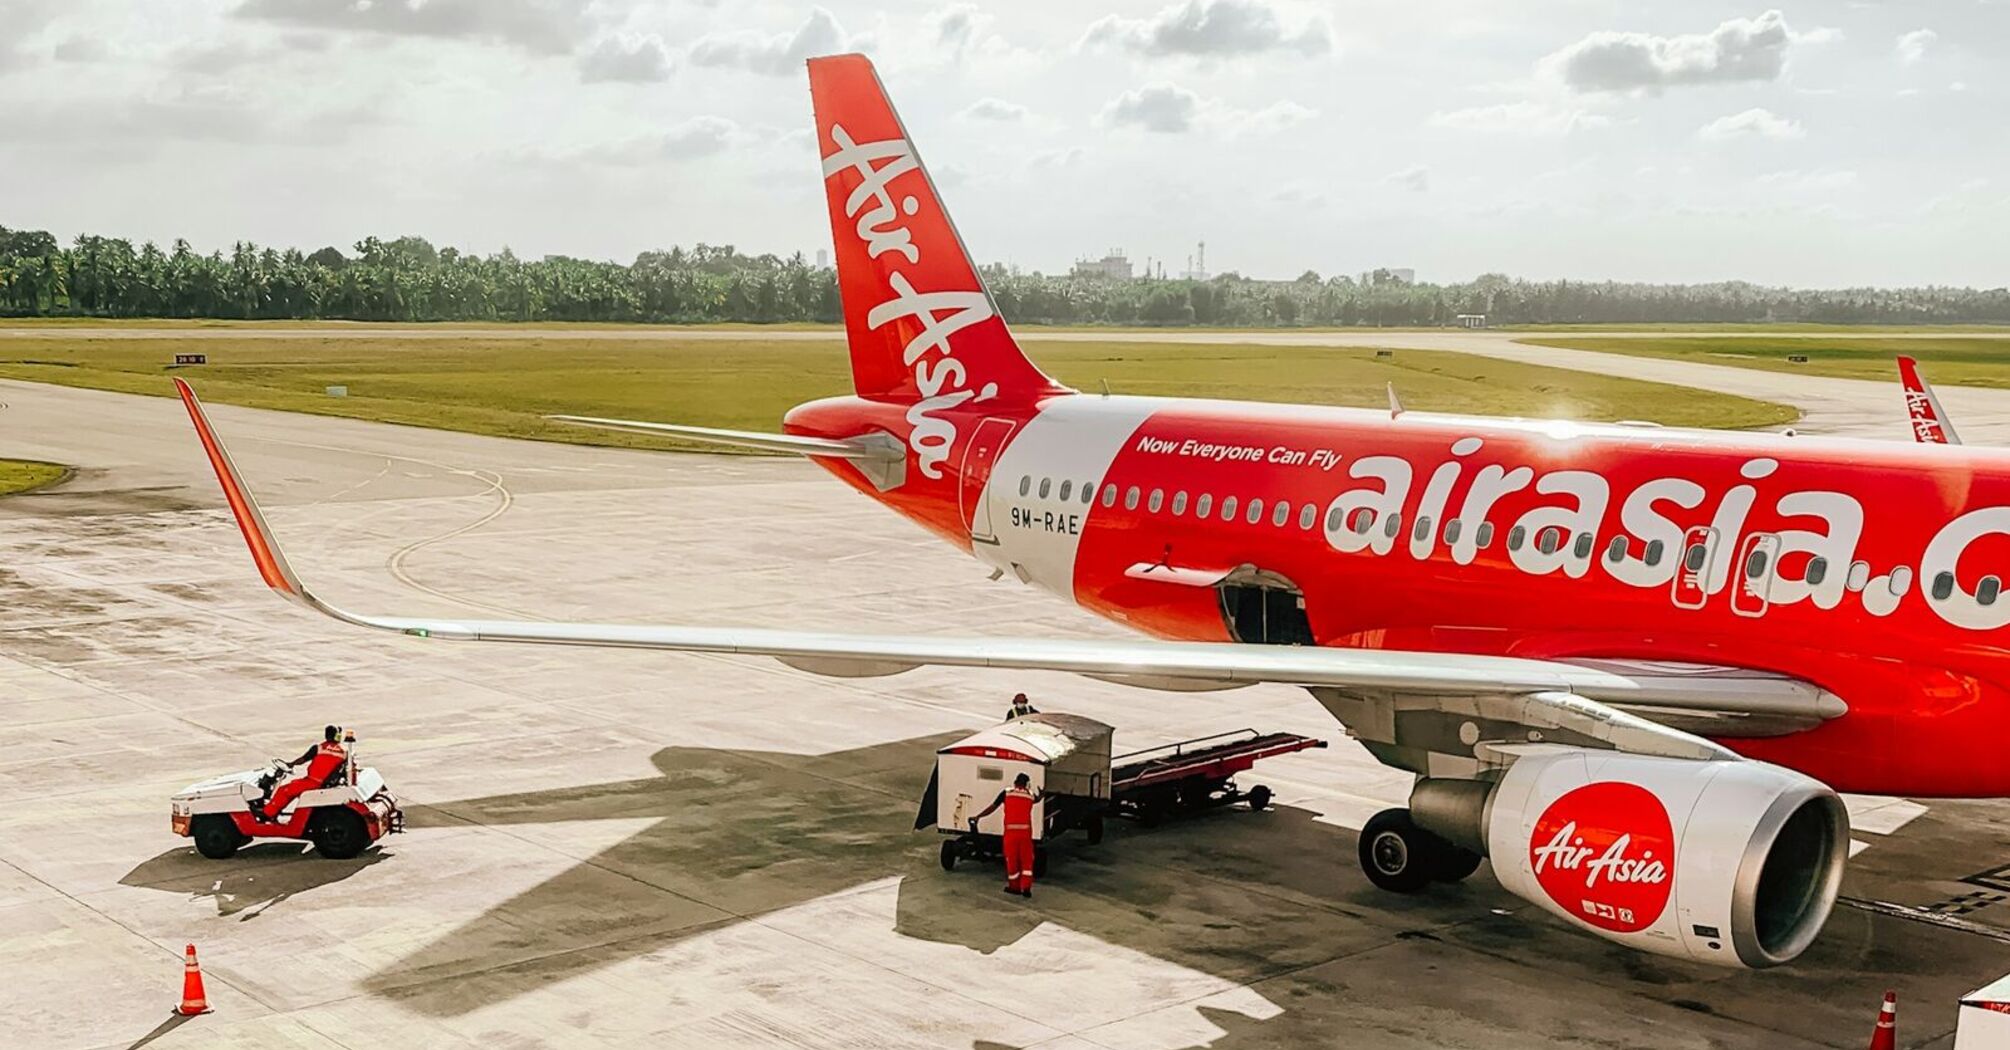 An AirAsia aircraft on the tarmac, with clear skies in the background